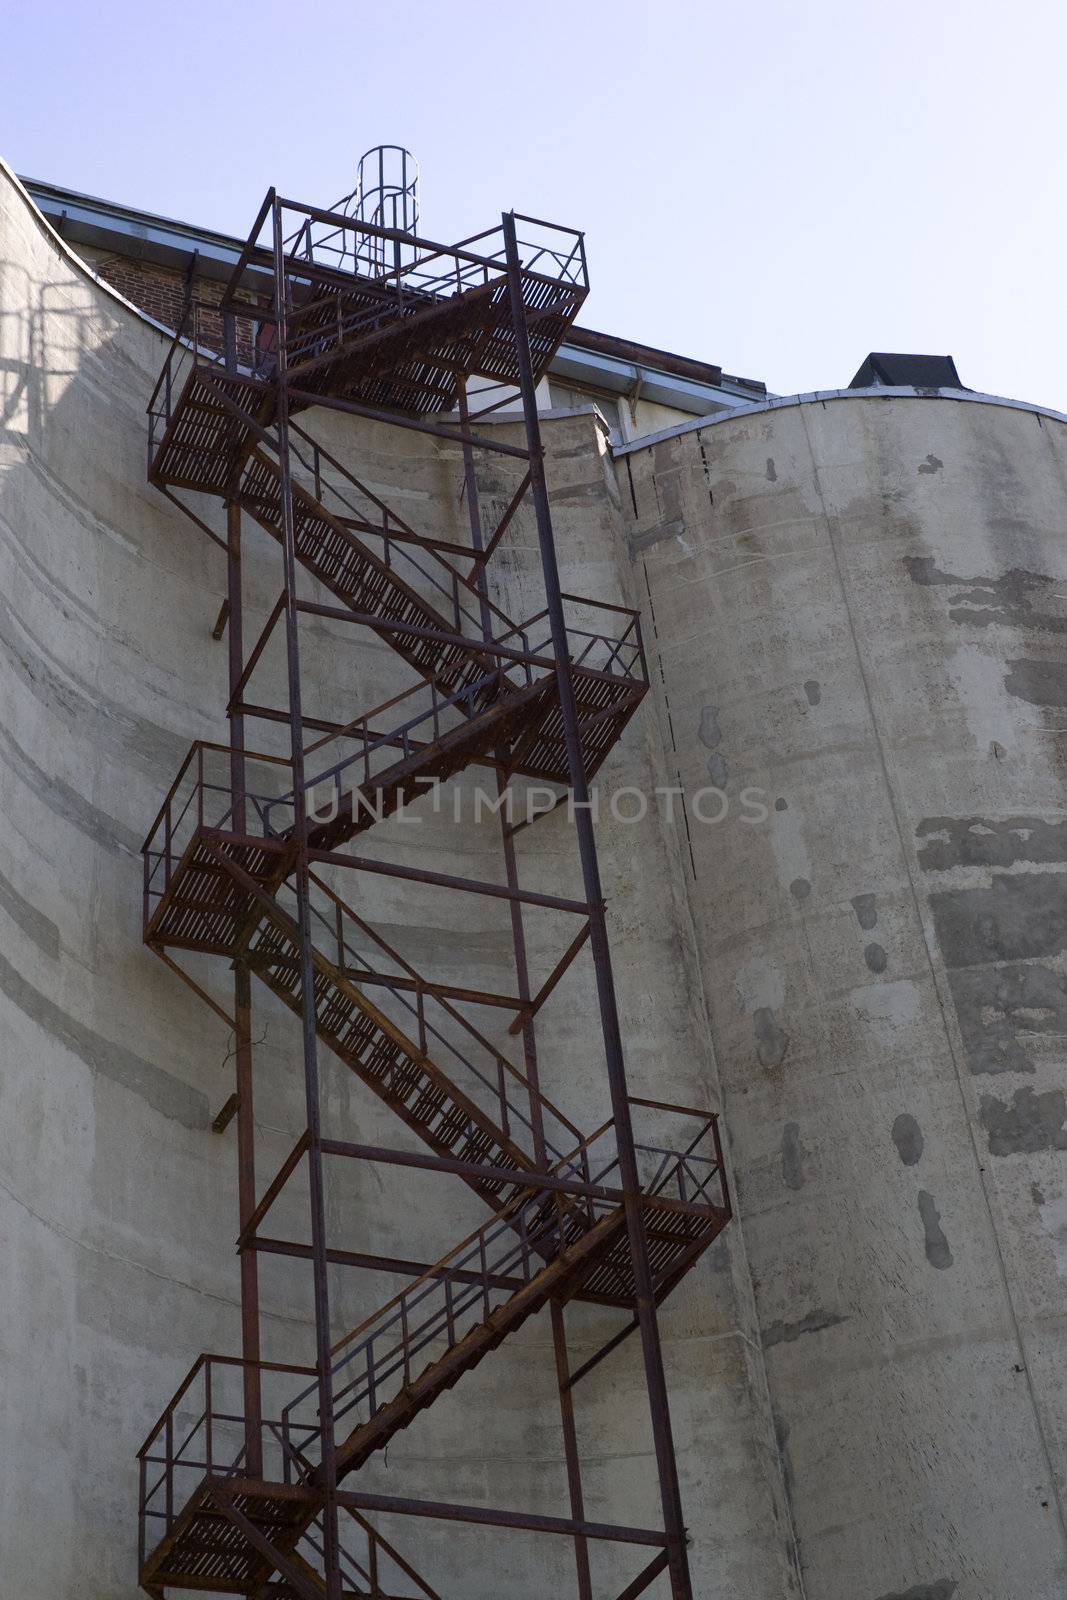 Staircase that extends up the side of a grain silo.